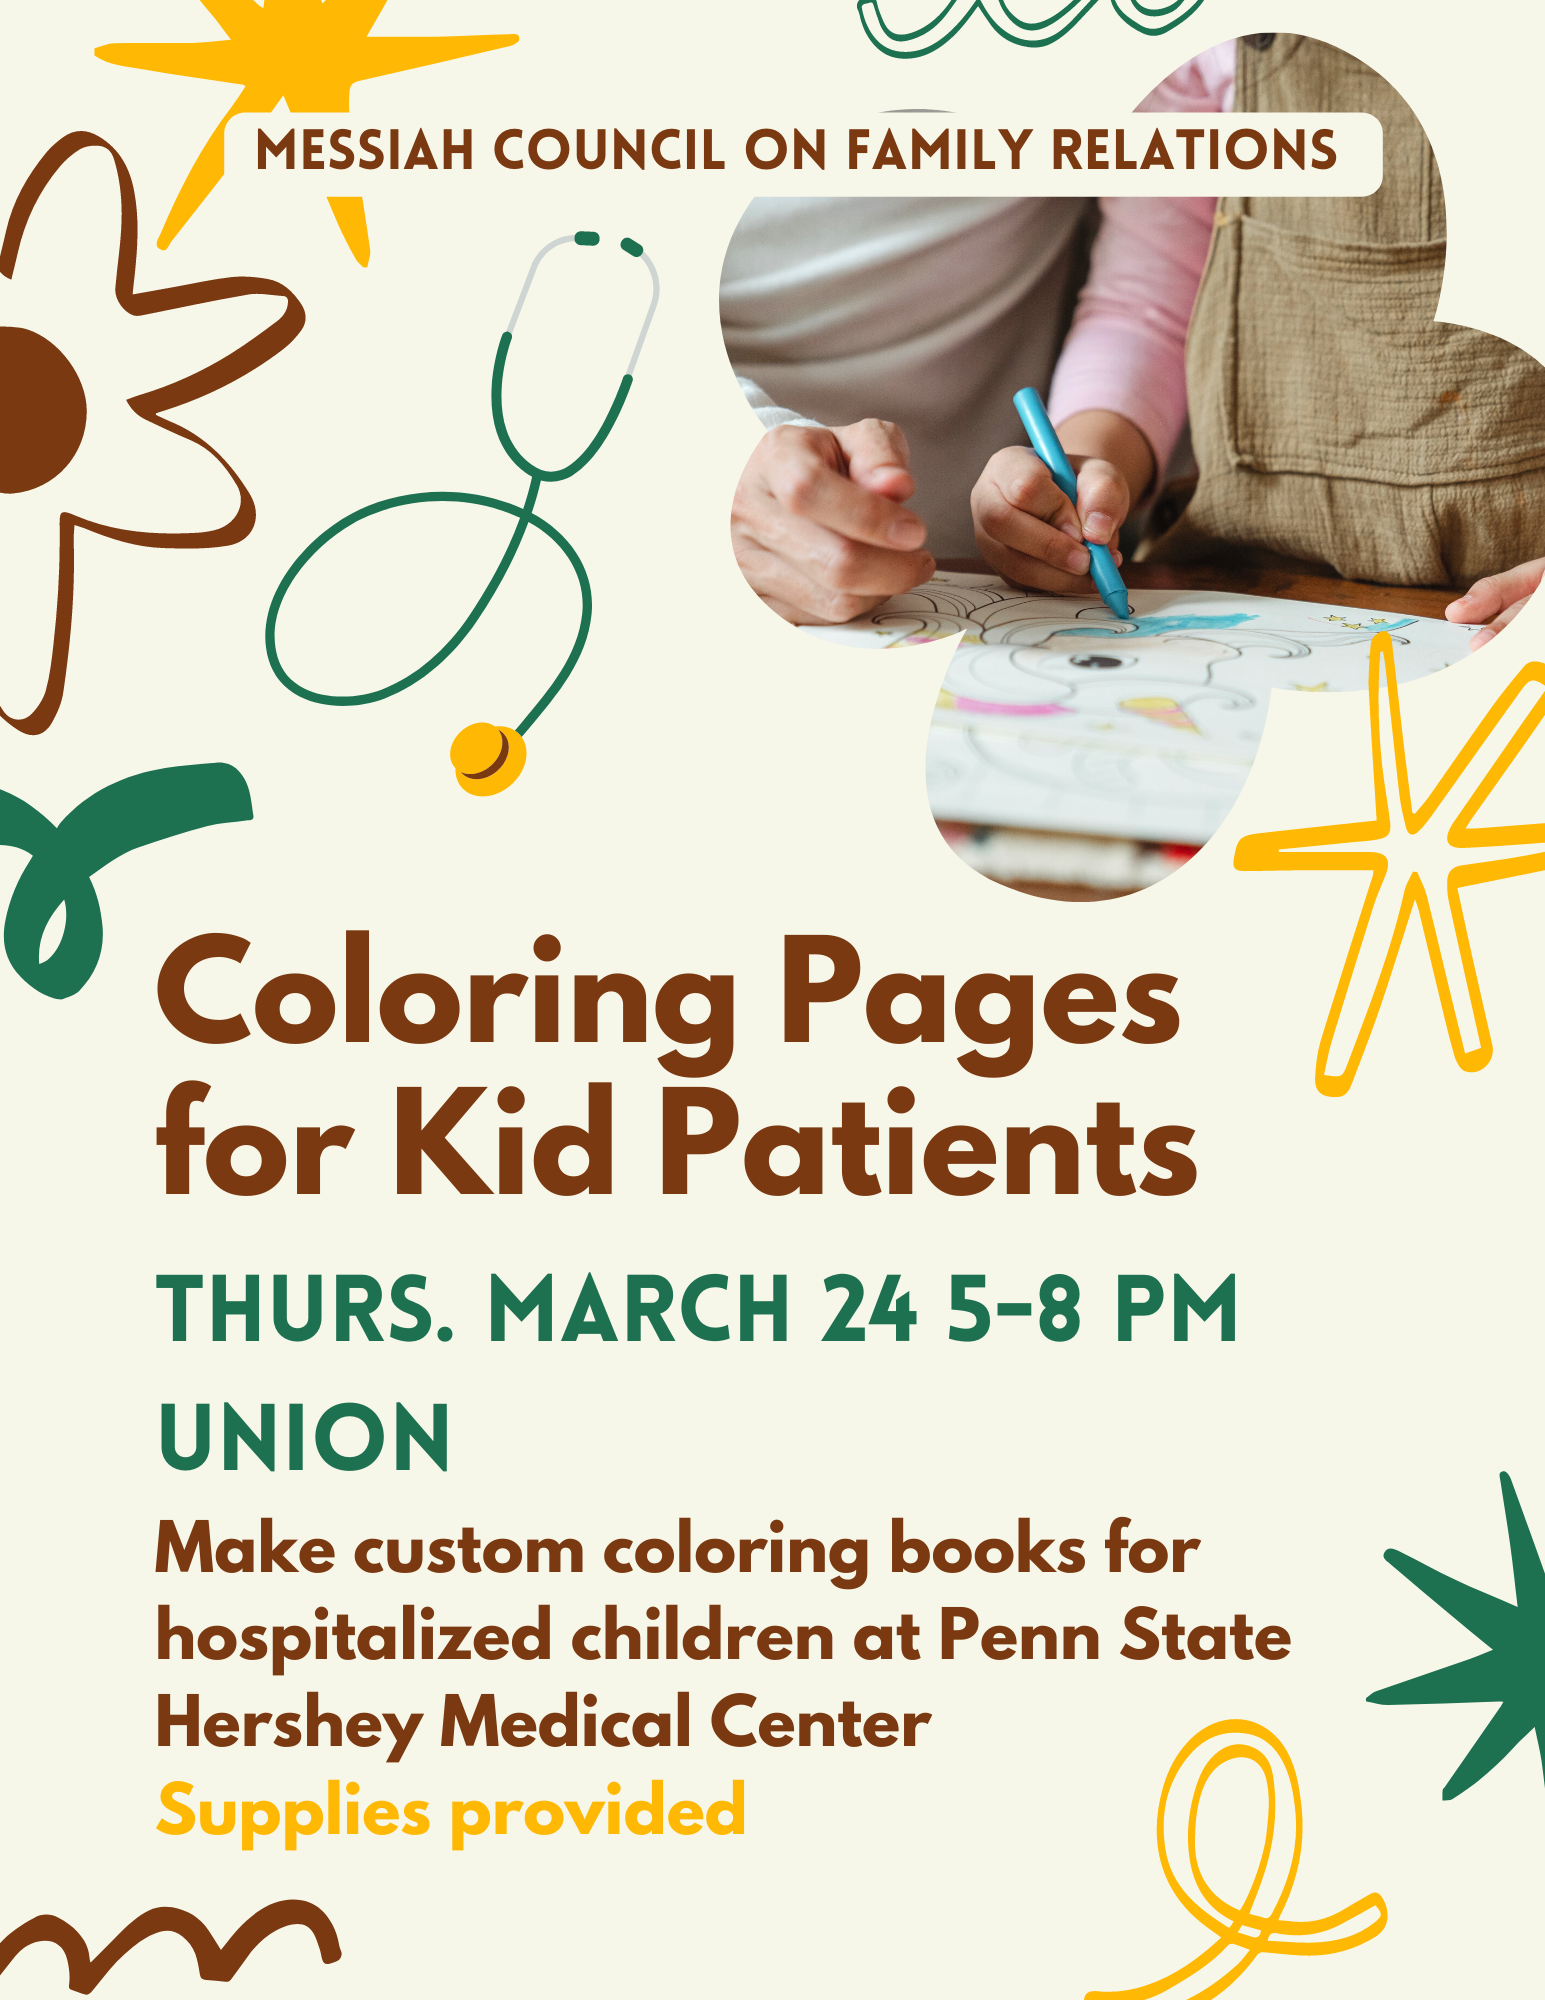 Coloring pages for kid patients flyer 22 pic